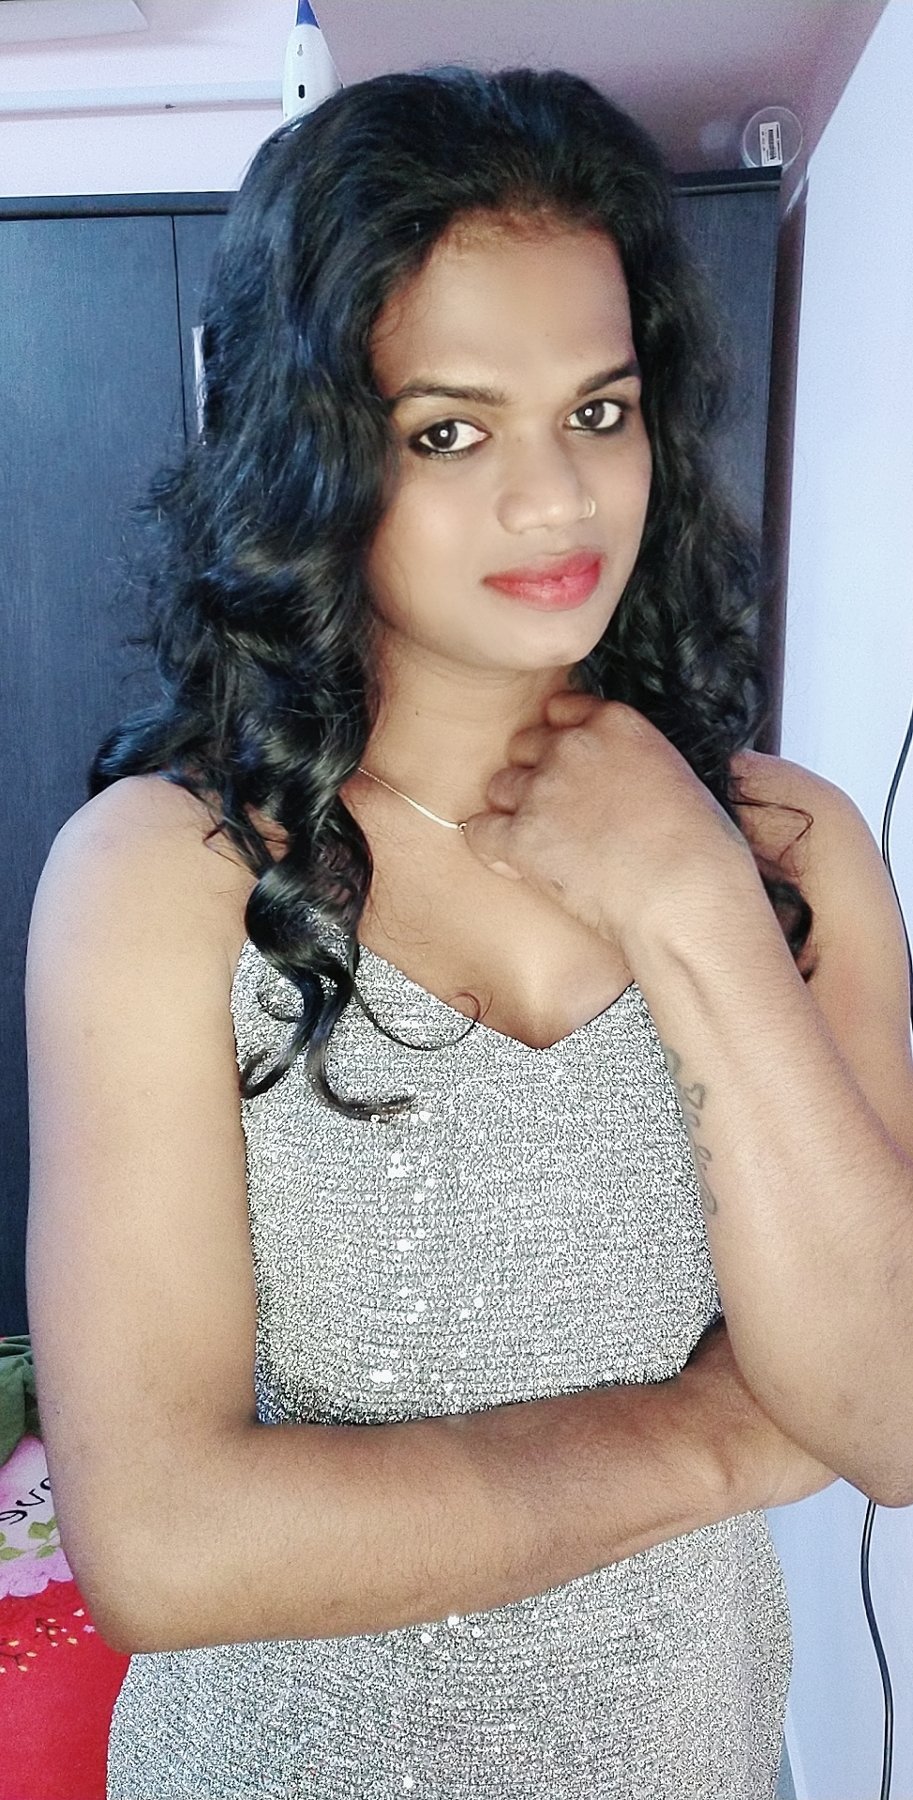 Shruthi Indian Transsexual Adult Performer In Chennai